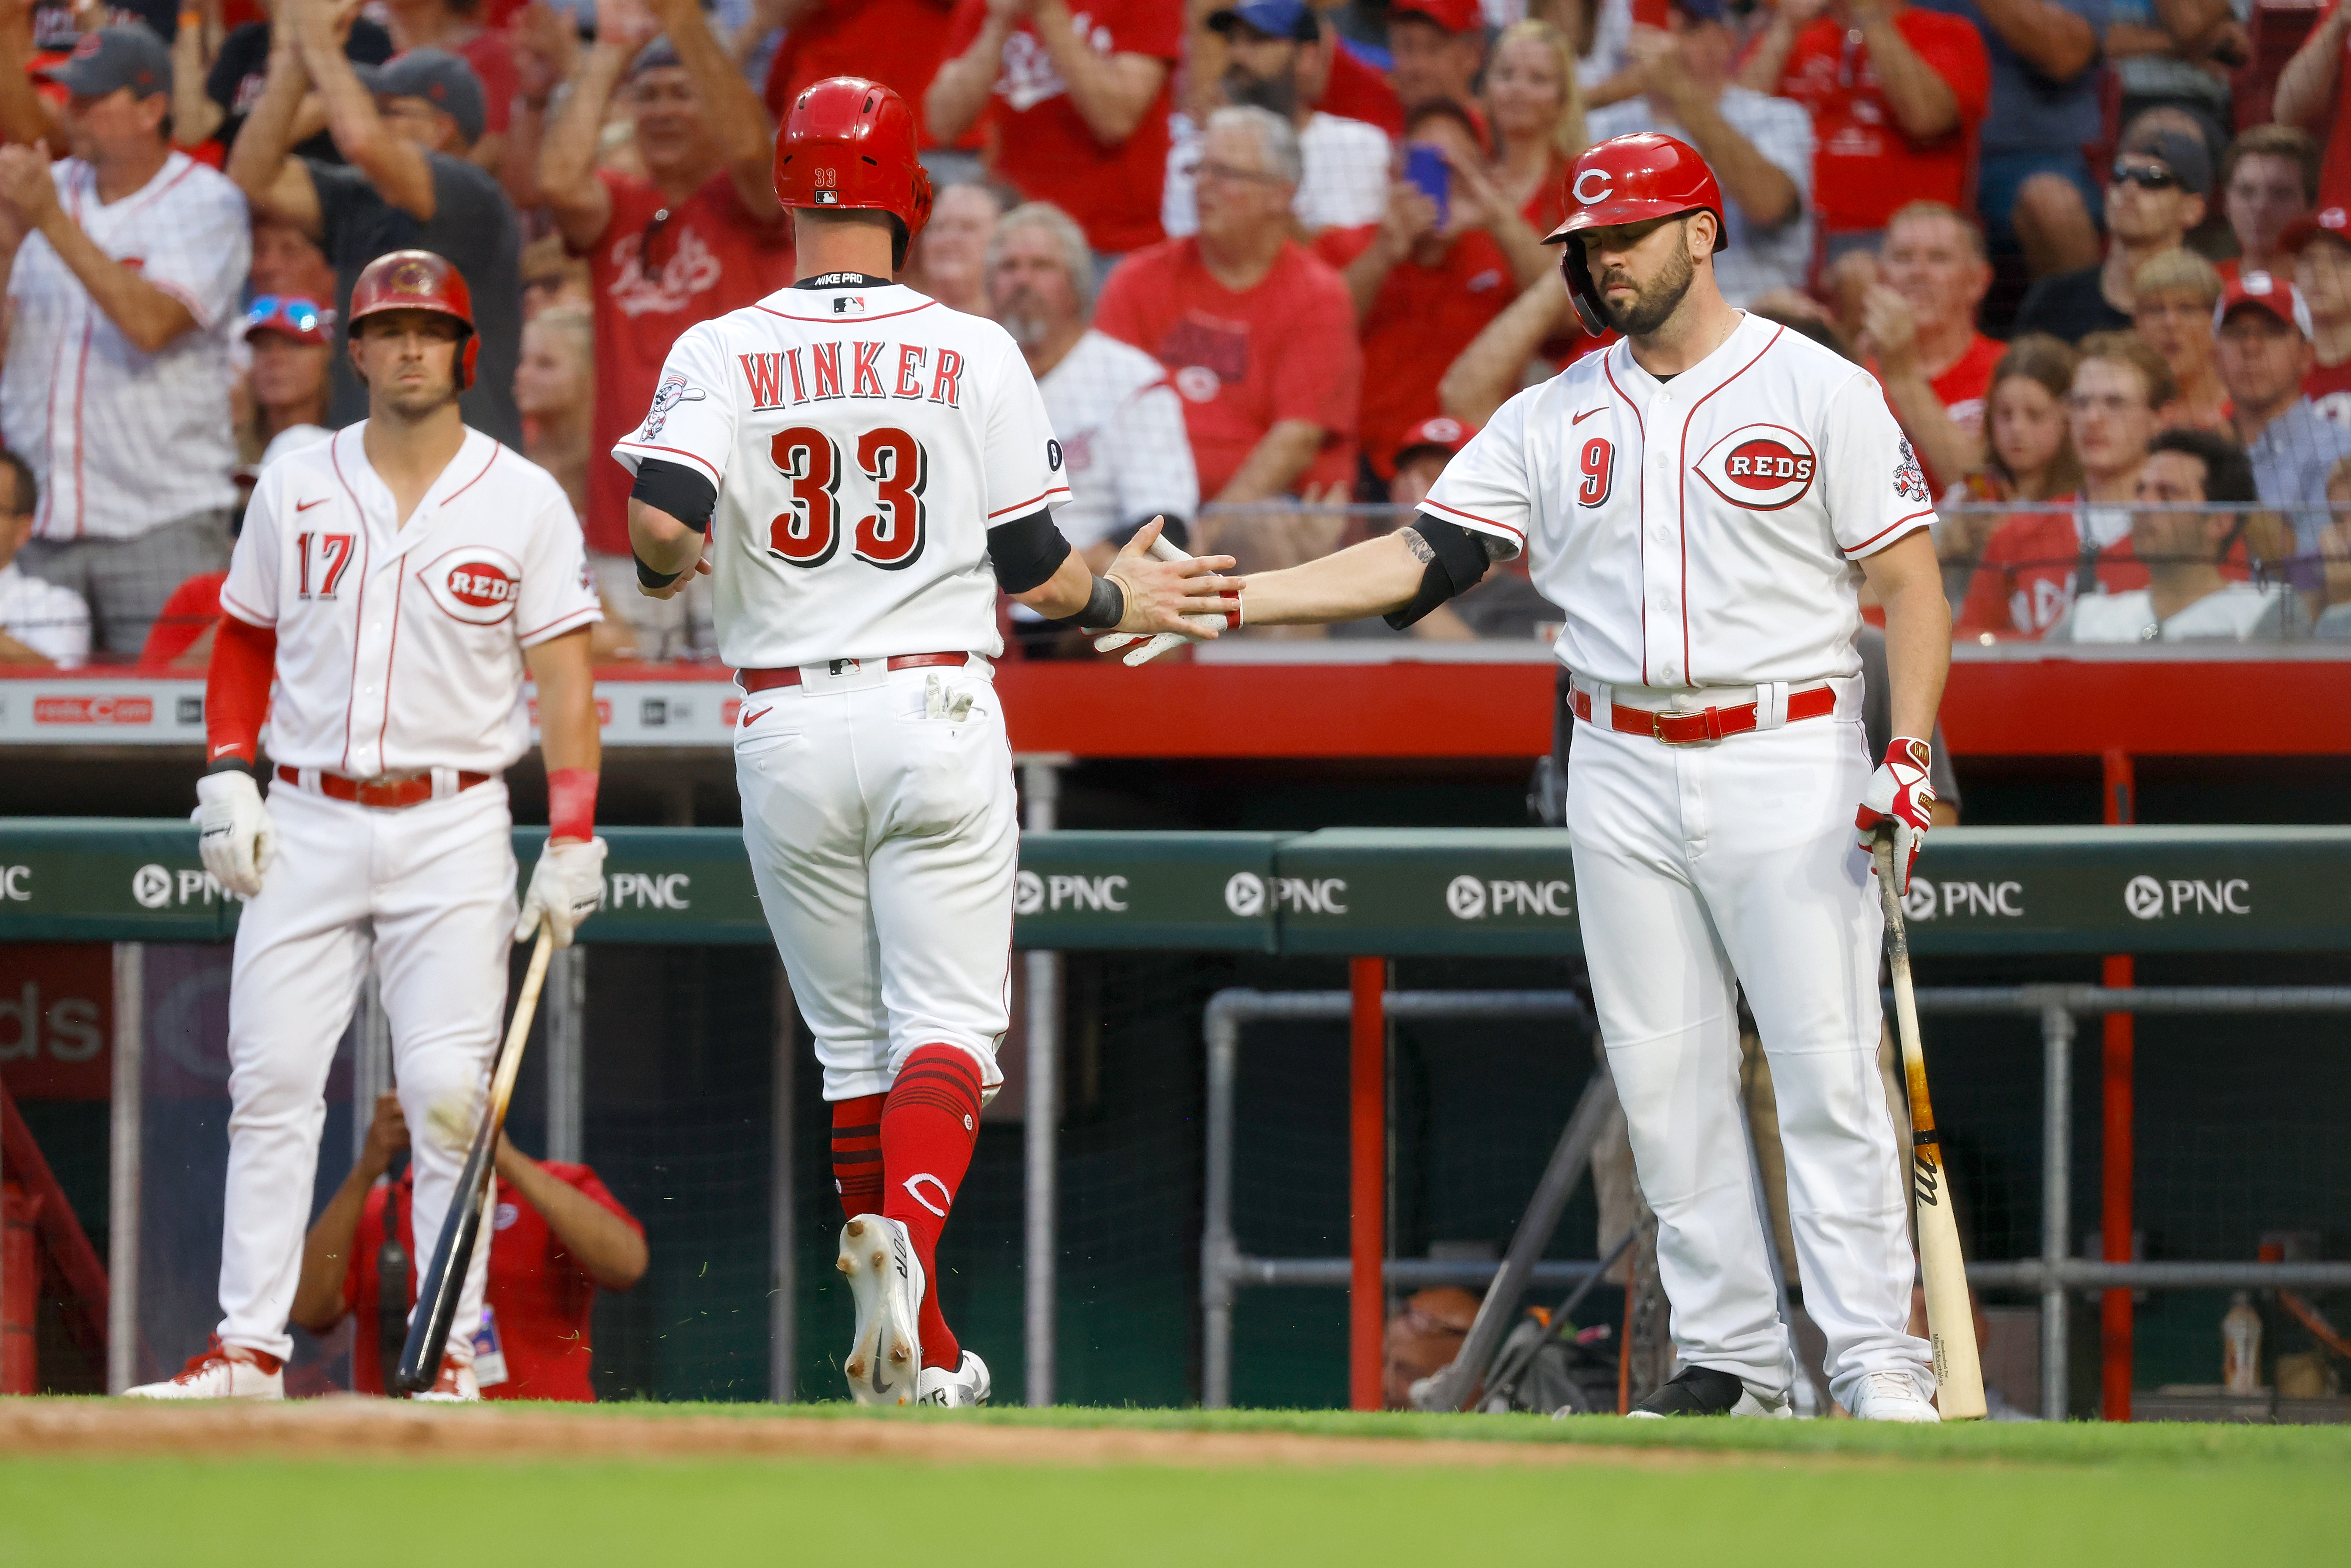 Reds: No guarantee Mike Moustakas will be on the roster in 2023